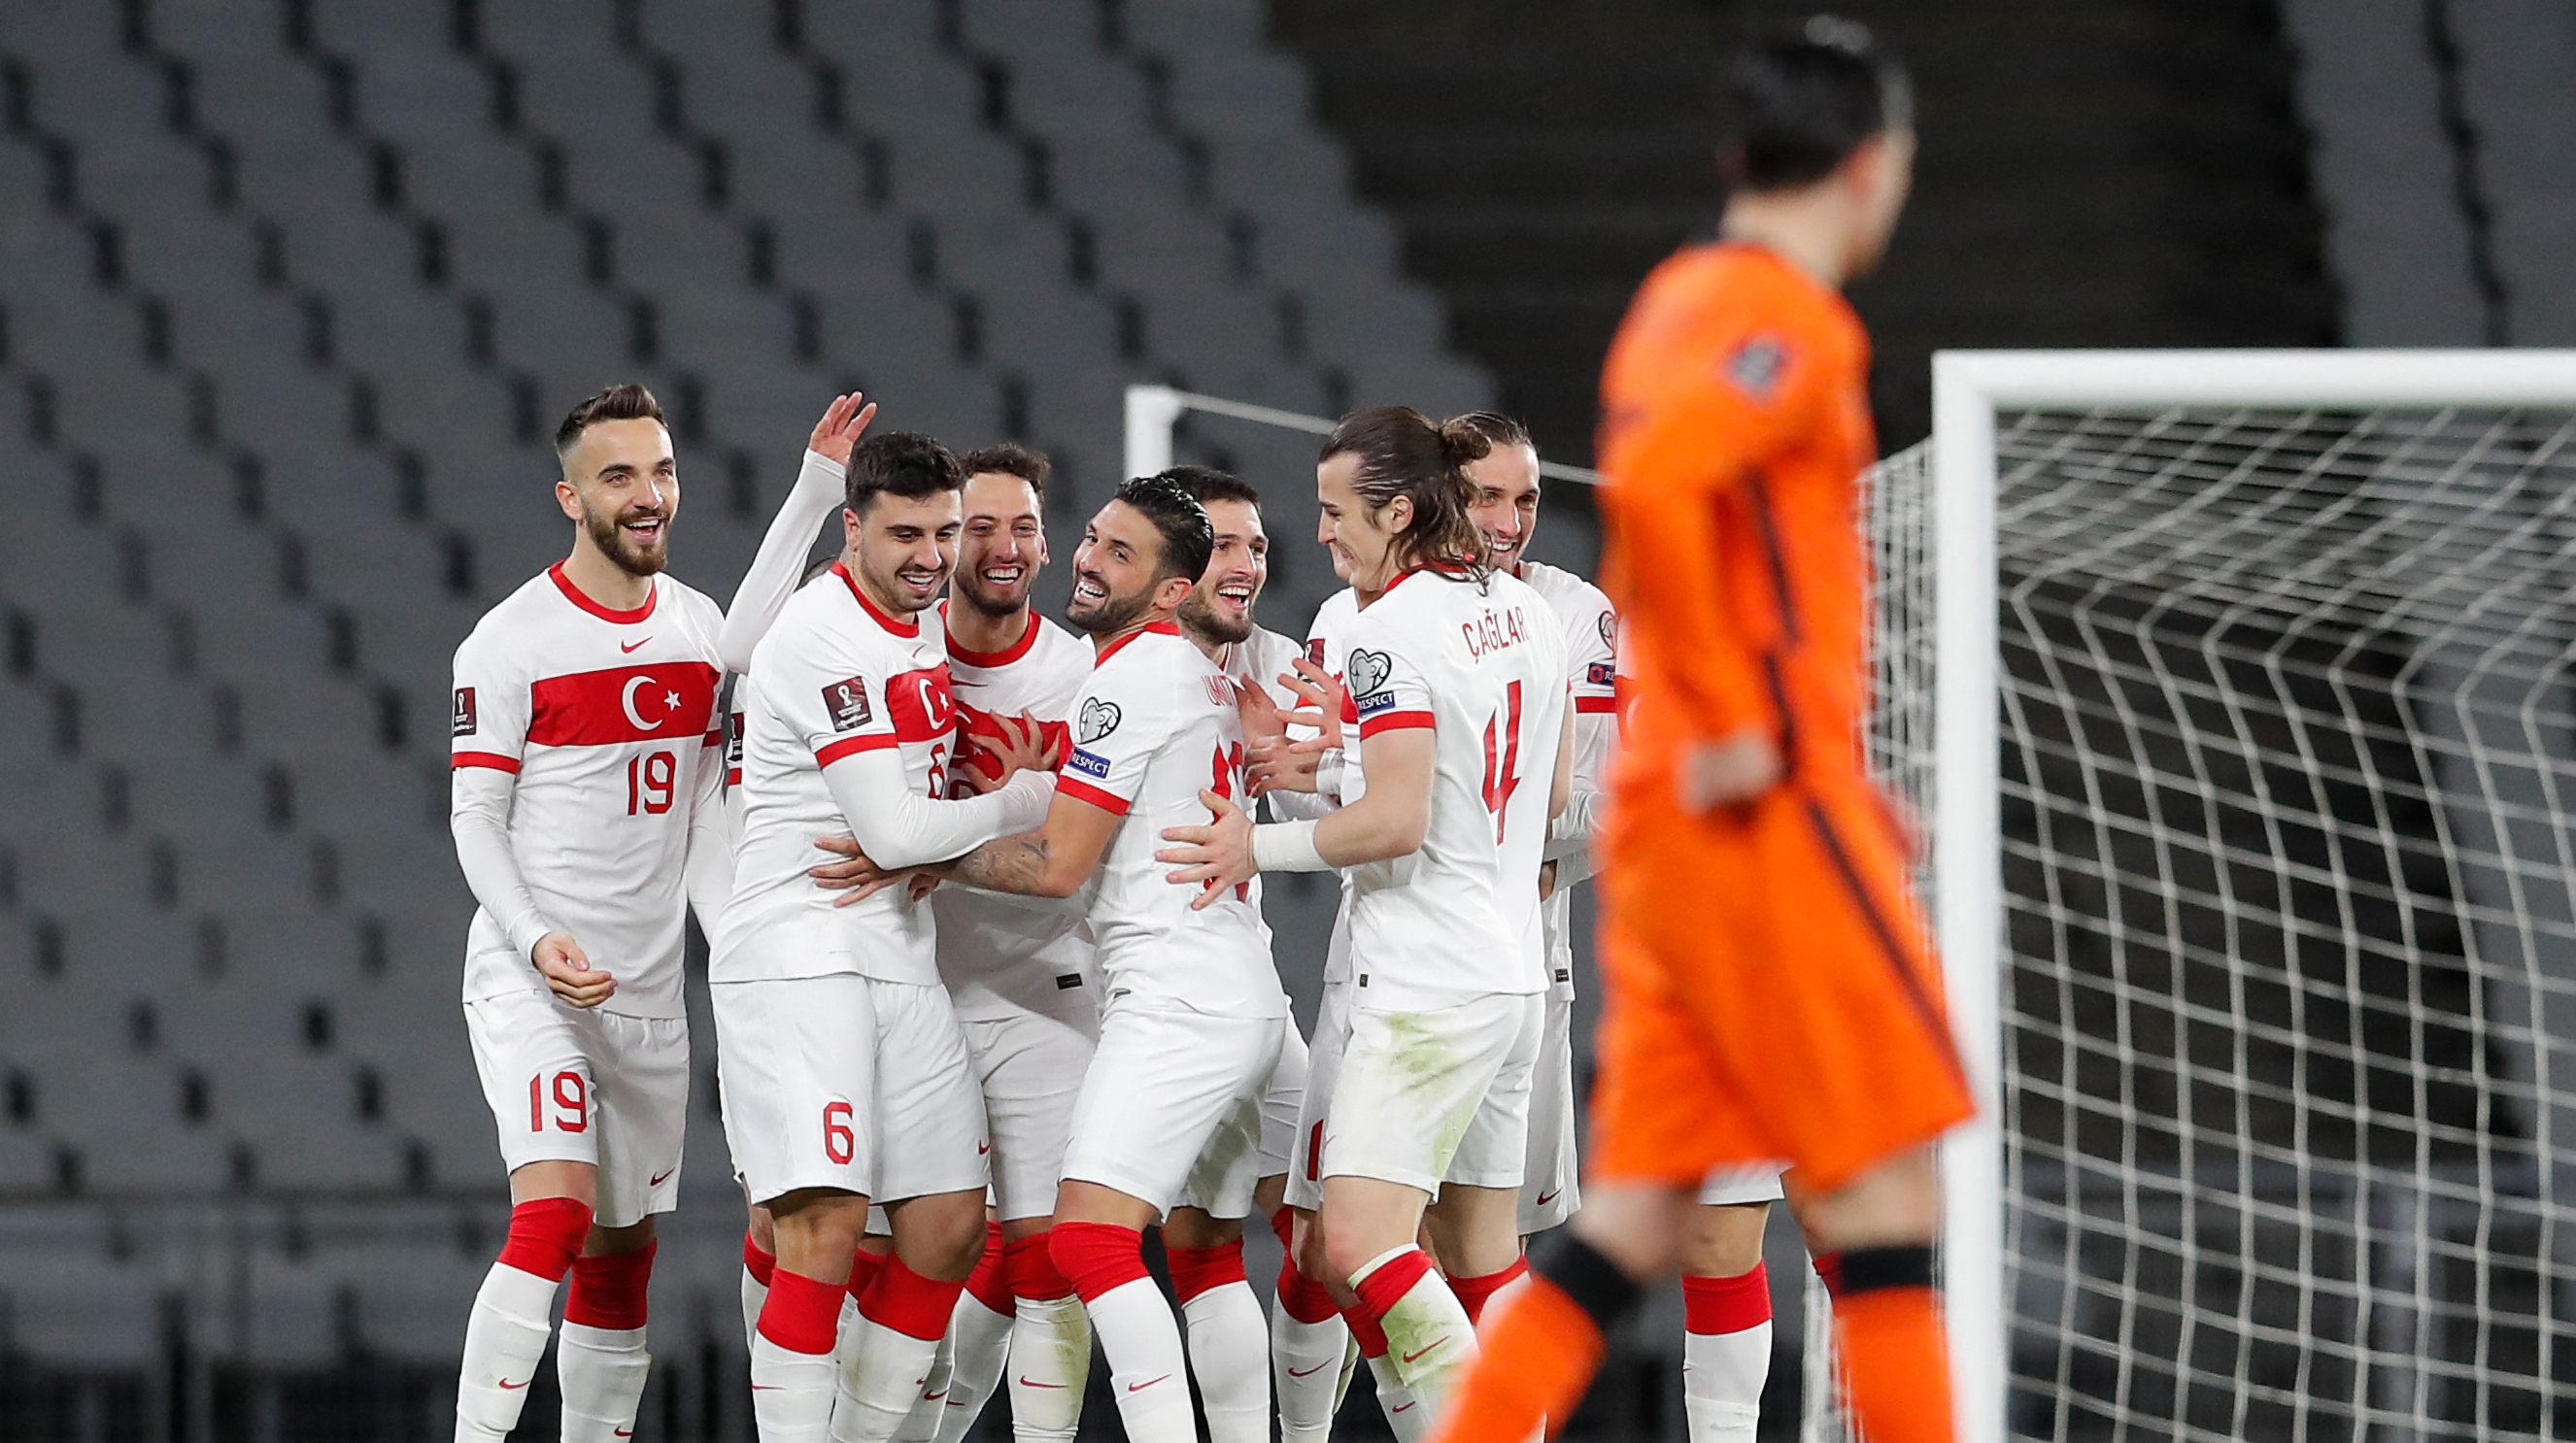 Turkey's players celebrate after scoring their teams's third goal during the FIFA World Cup Qatar 2022 qualification Group G football match between Turkey and The Netherlands at the Ataturk Olympic Stadium, in Istanbul, on March 24, 2021.